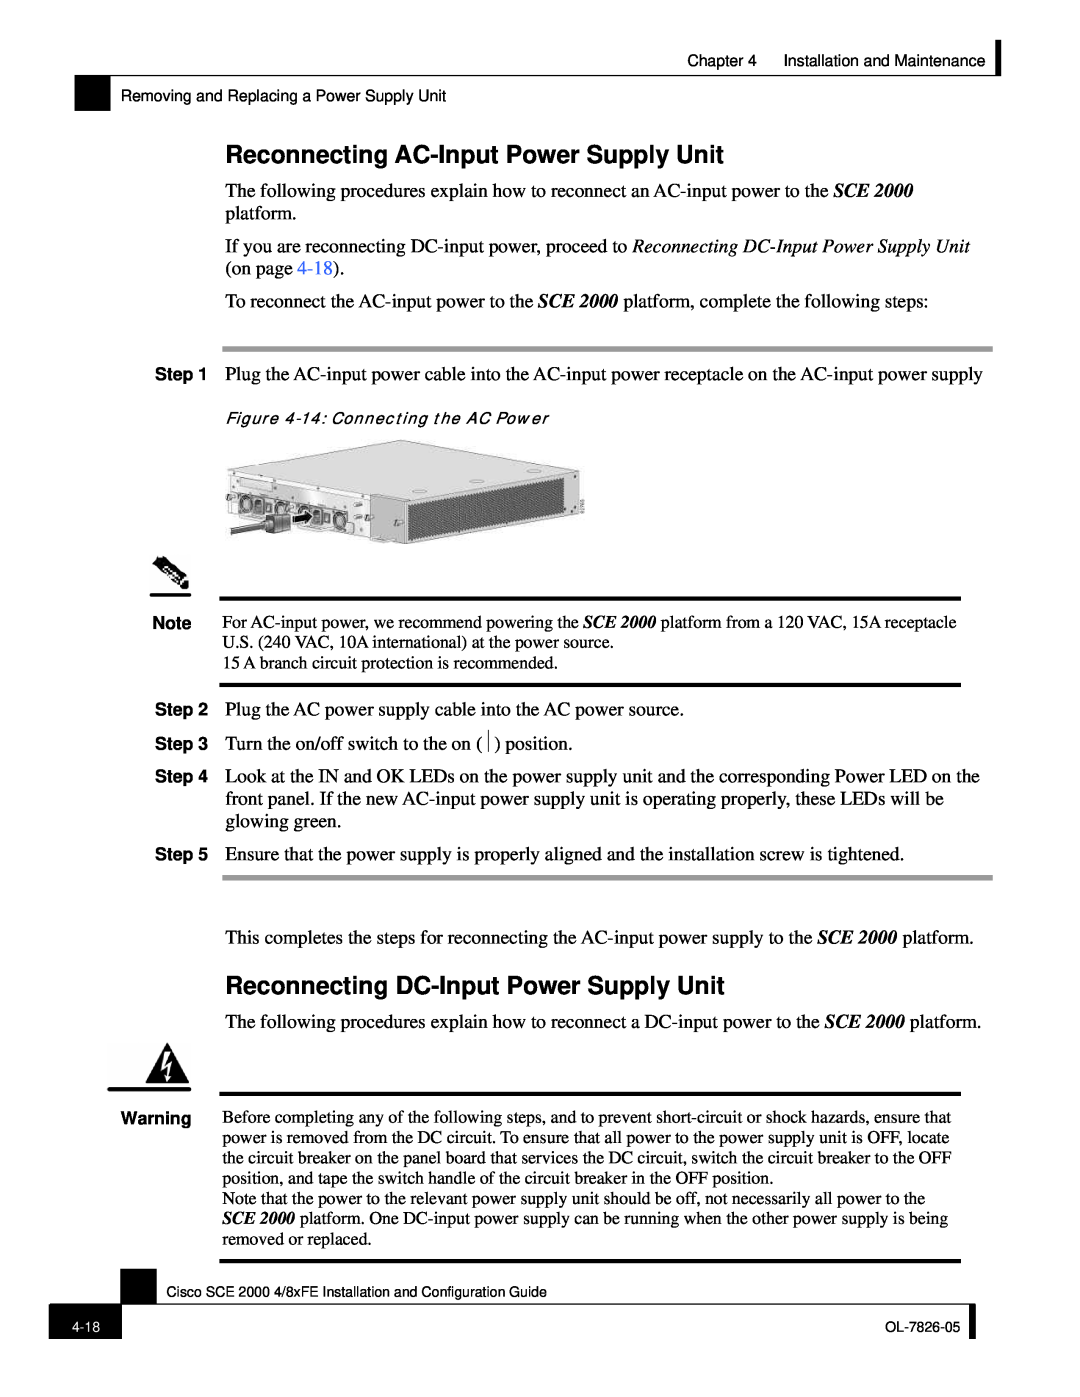 Cisco Systems SCE 2000 4/8xFE manual Reconnecting AC-Input Power Supply Unit, Reconnecting DC-Input Power Supply Unit 